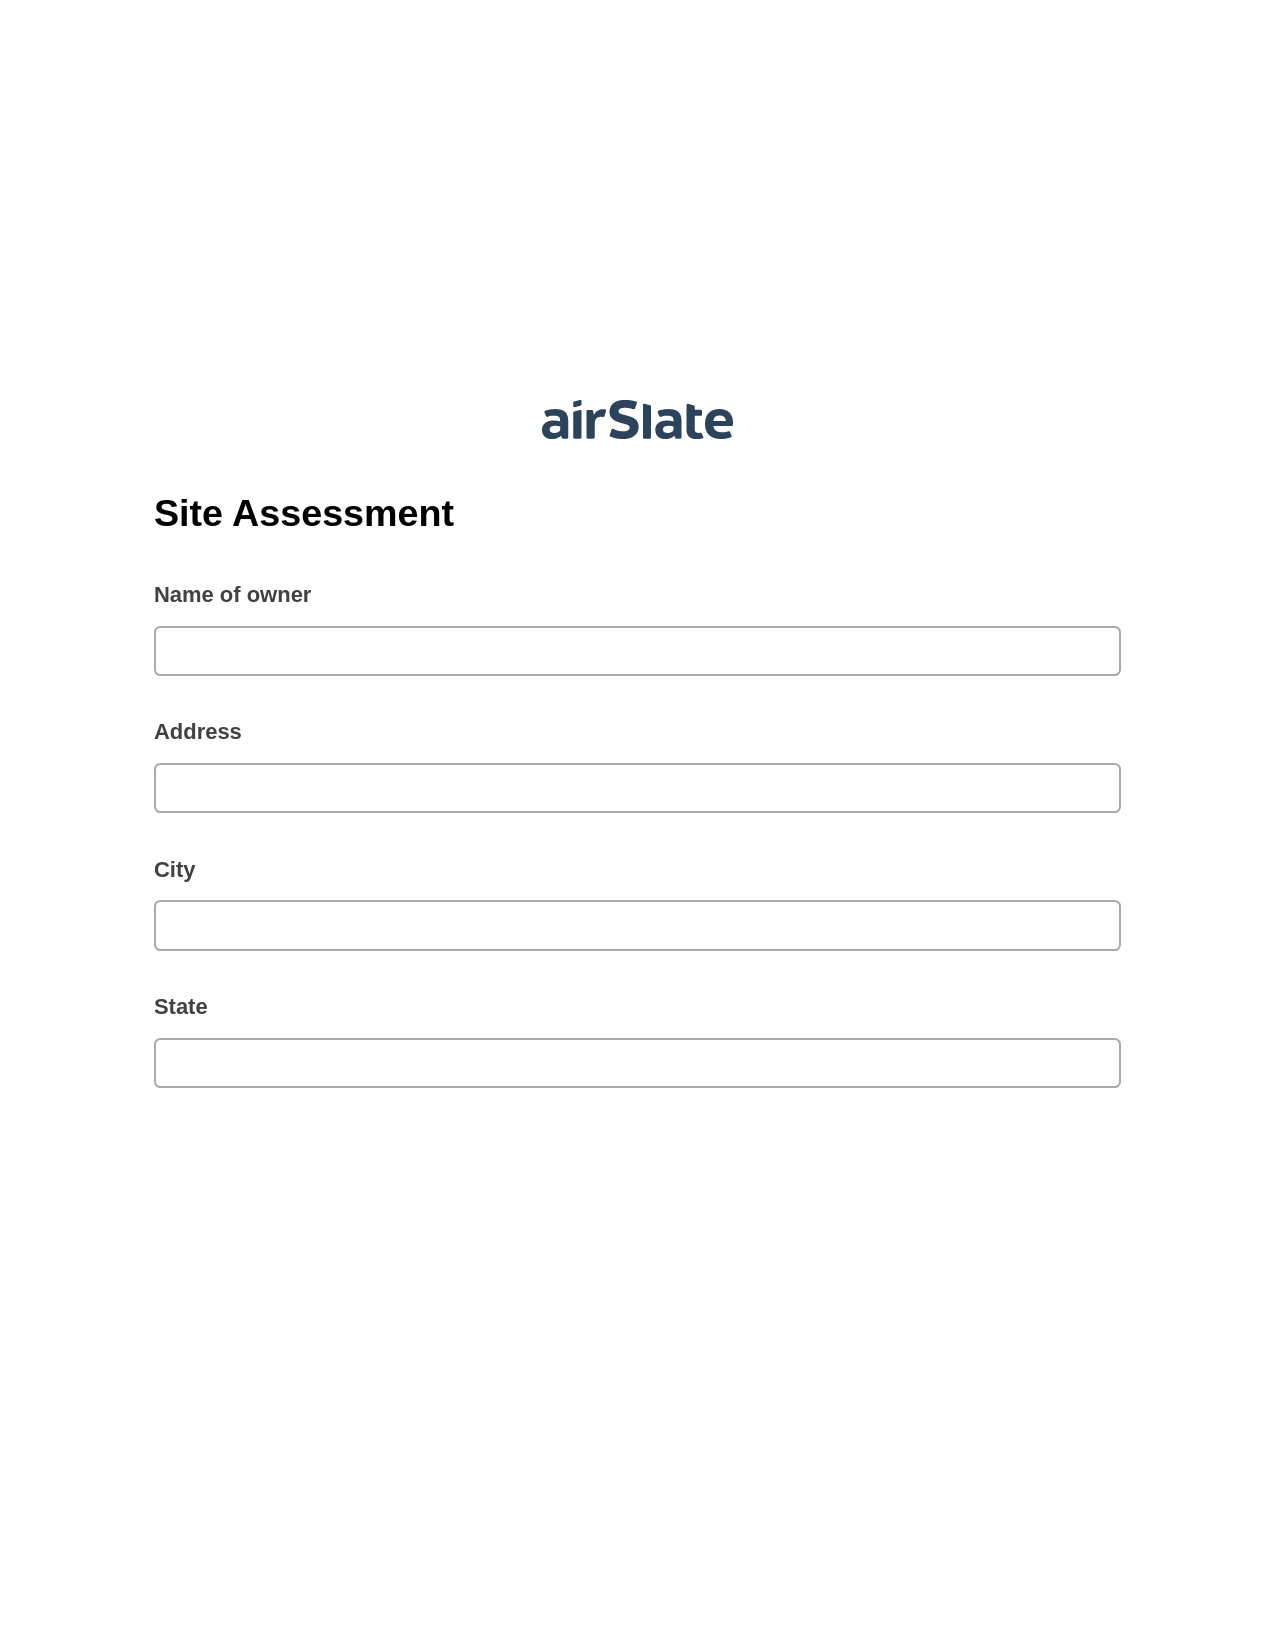 Multirole Site Assessment Pre-fill from Salesforce Record Bot, Assign Slate Name Bot, Post-finish Document Bot